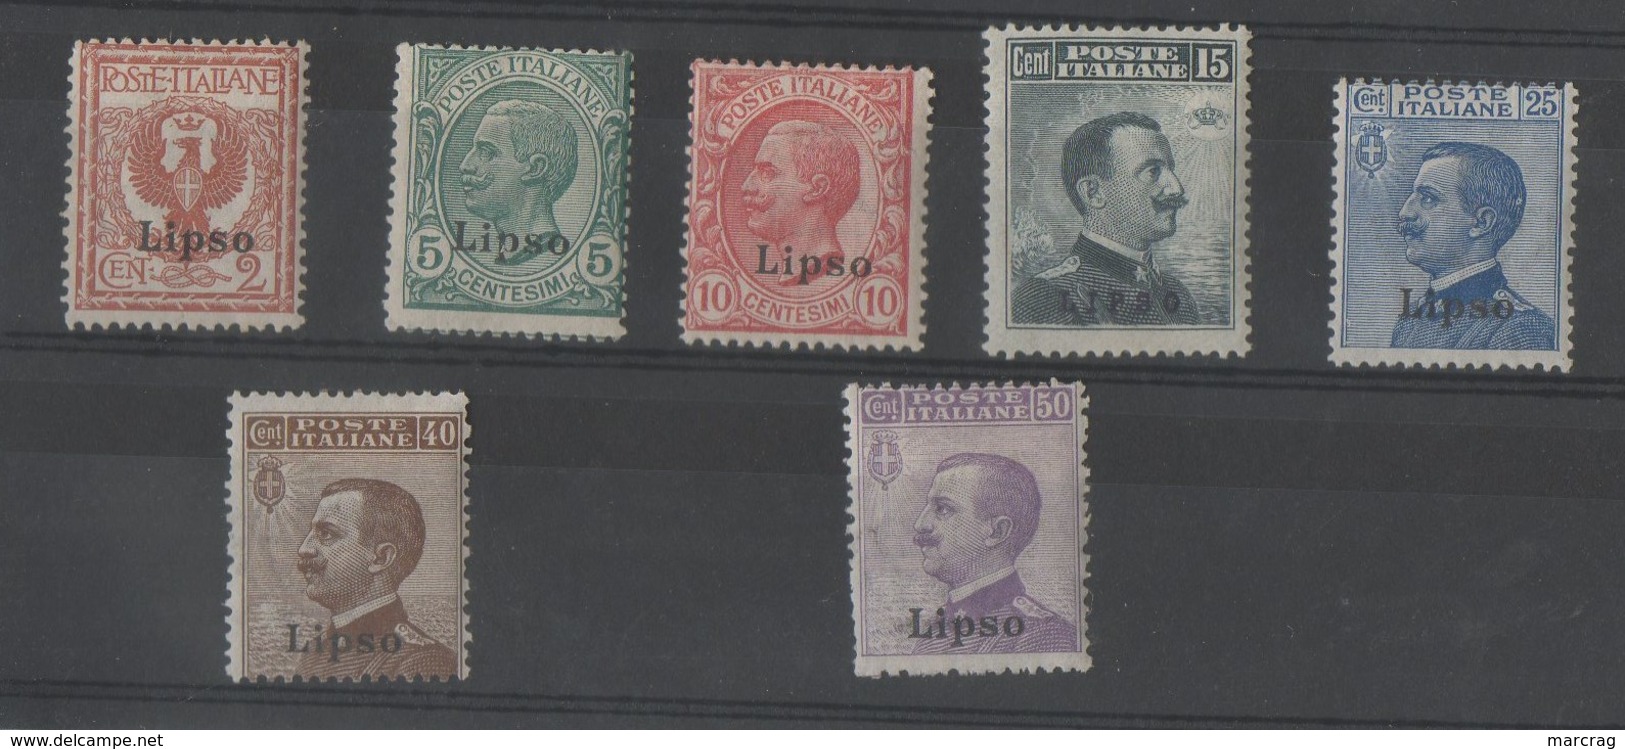 TIMBRES AVEC CHARNIERES OCCUPATION ITALIENNE - Egée (Lipso)